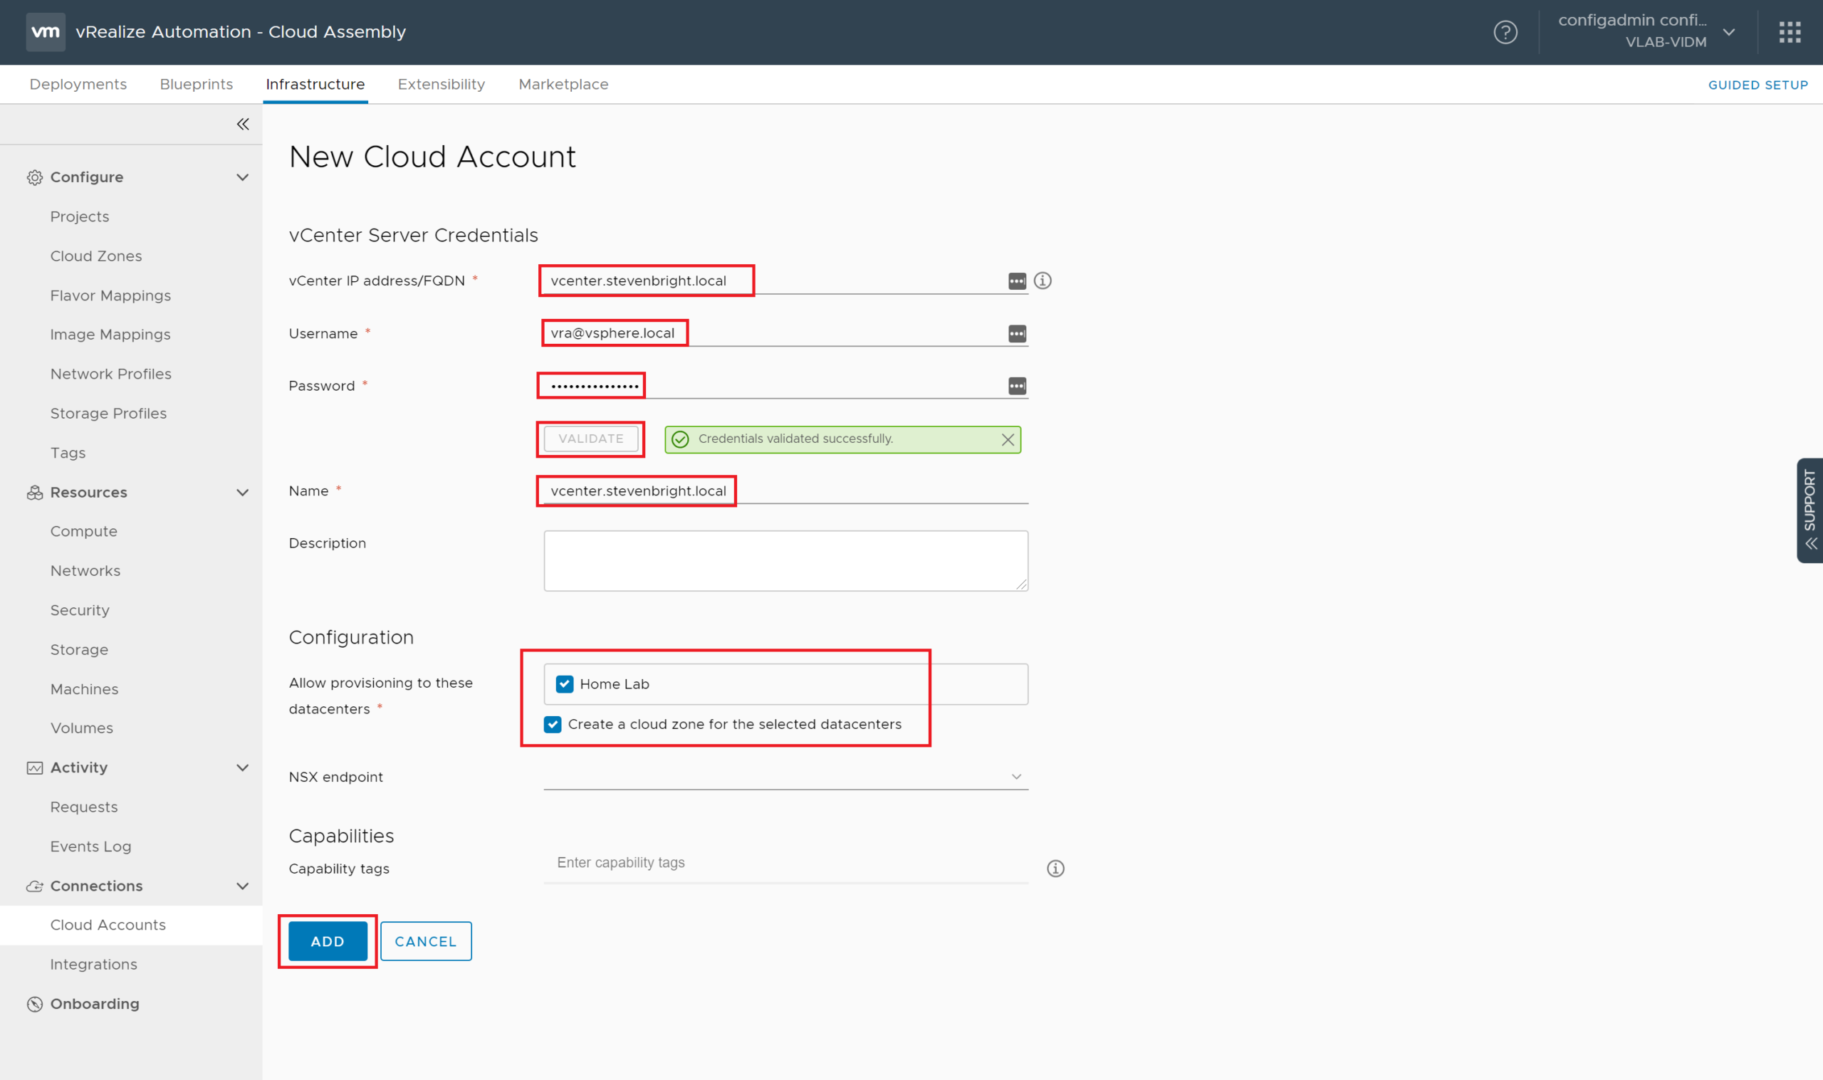 vRealize Automation 8.0 - Cloud Assembly - Add Cloud Account - New Cloud Account